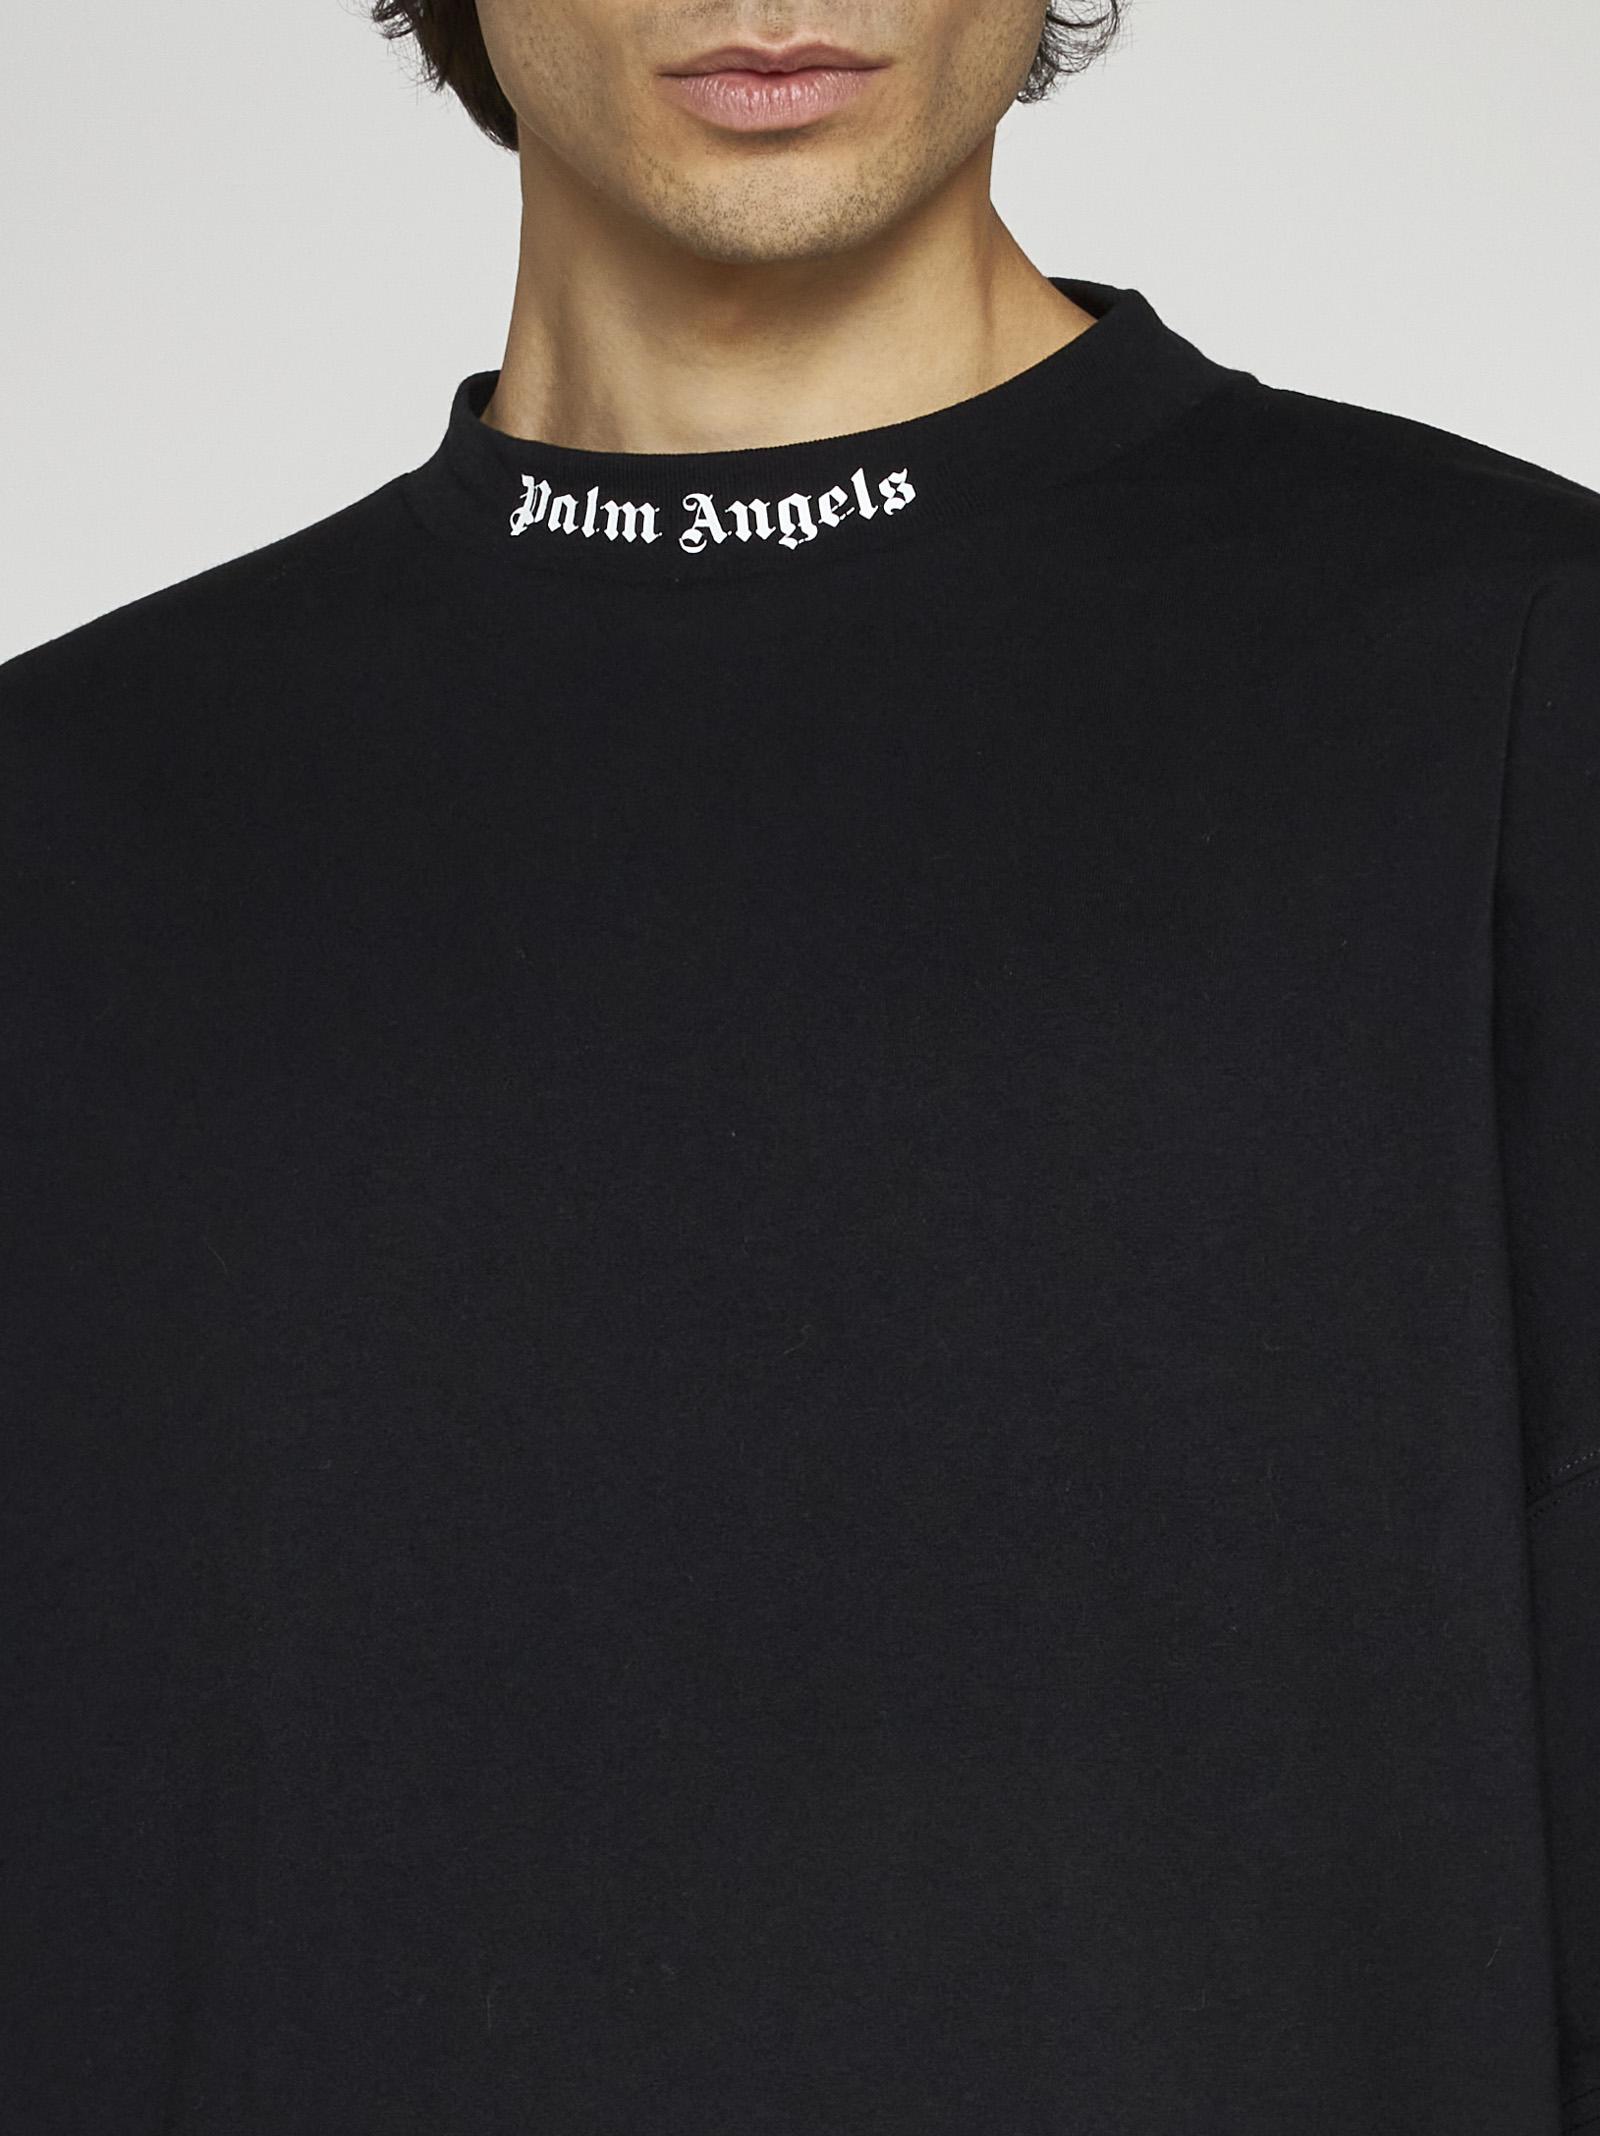 Palm Angels Logo Cotton Oversized T-shirt in Black for Men | Lyst